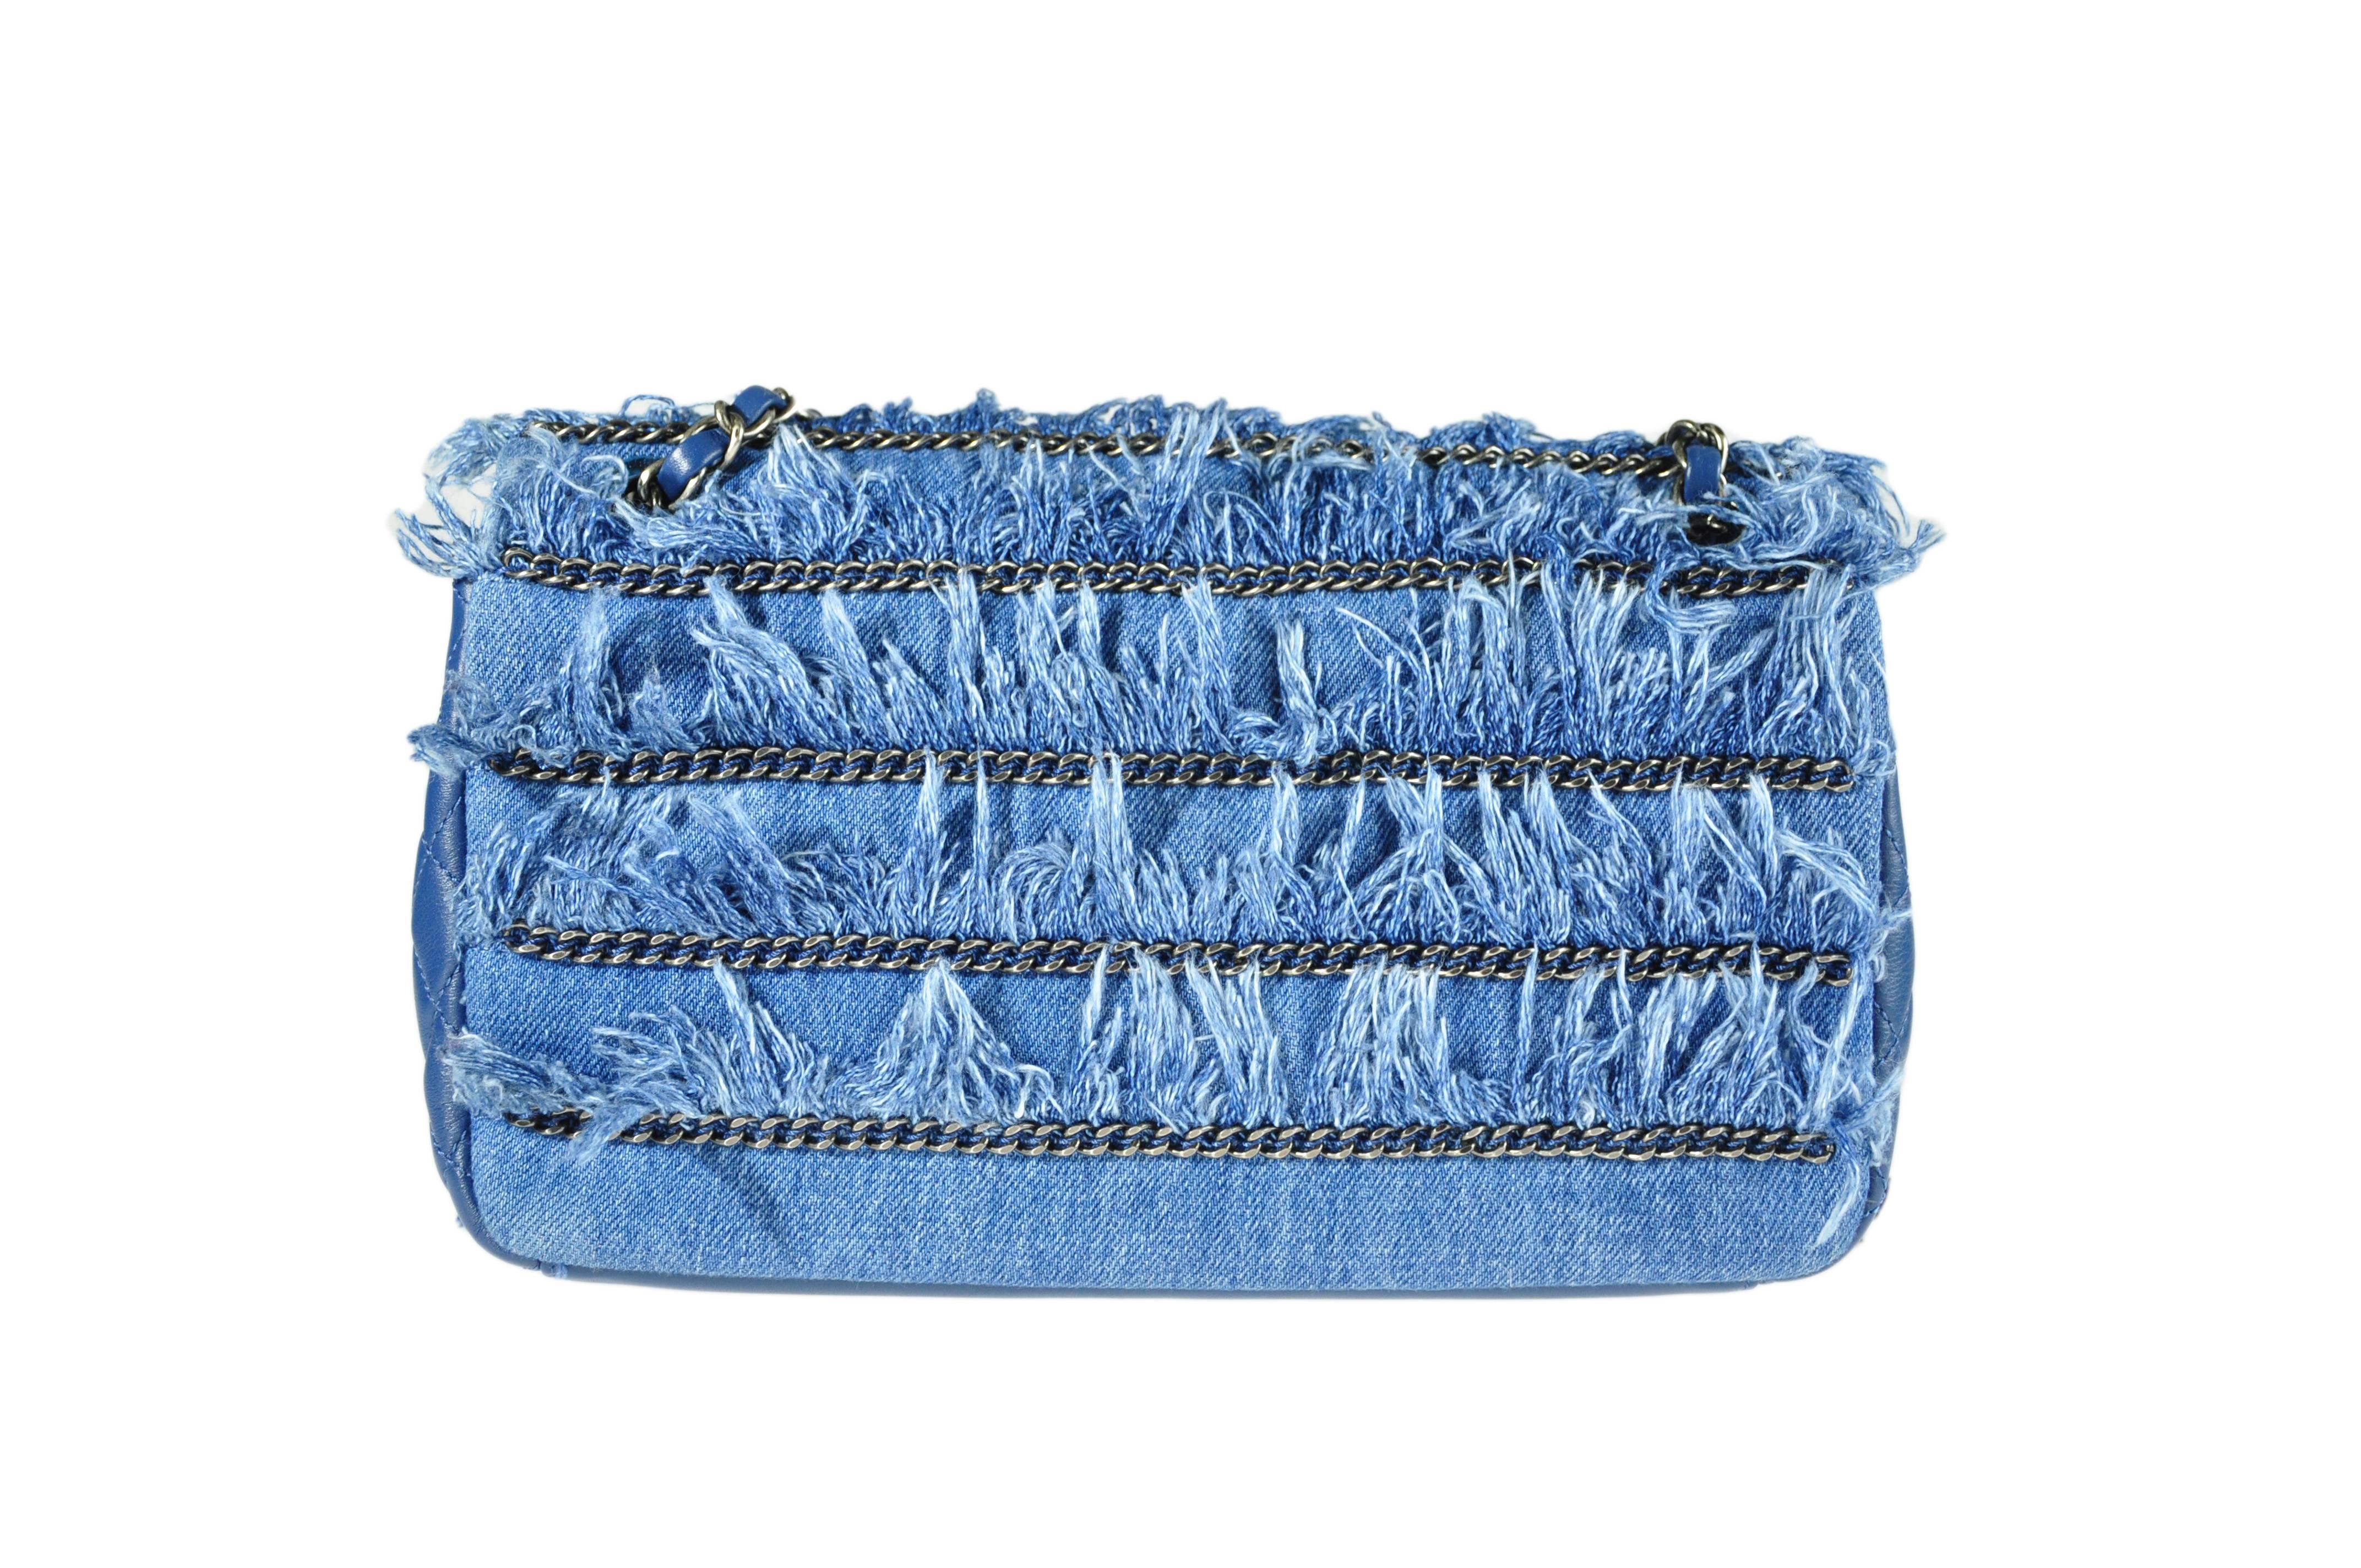 This fringe denim flag bag is from Chanel Dubai Cruise collection. It's beautifully crafted with fringe and chains. The chain shoulder strap is decorated with a few medallions and can be worn across the body.  CC turn lock closure on flap, one